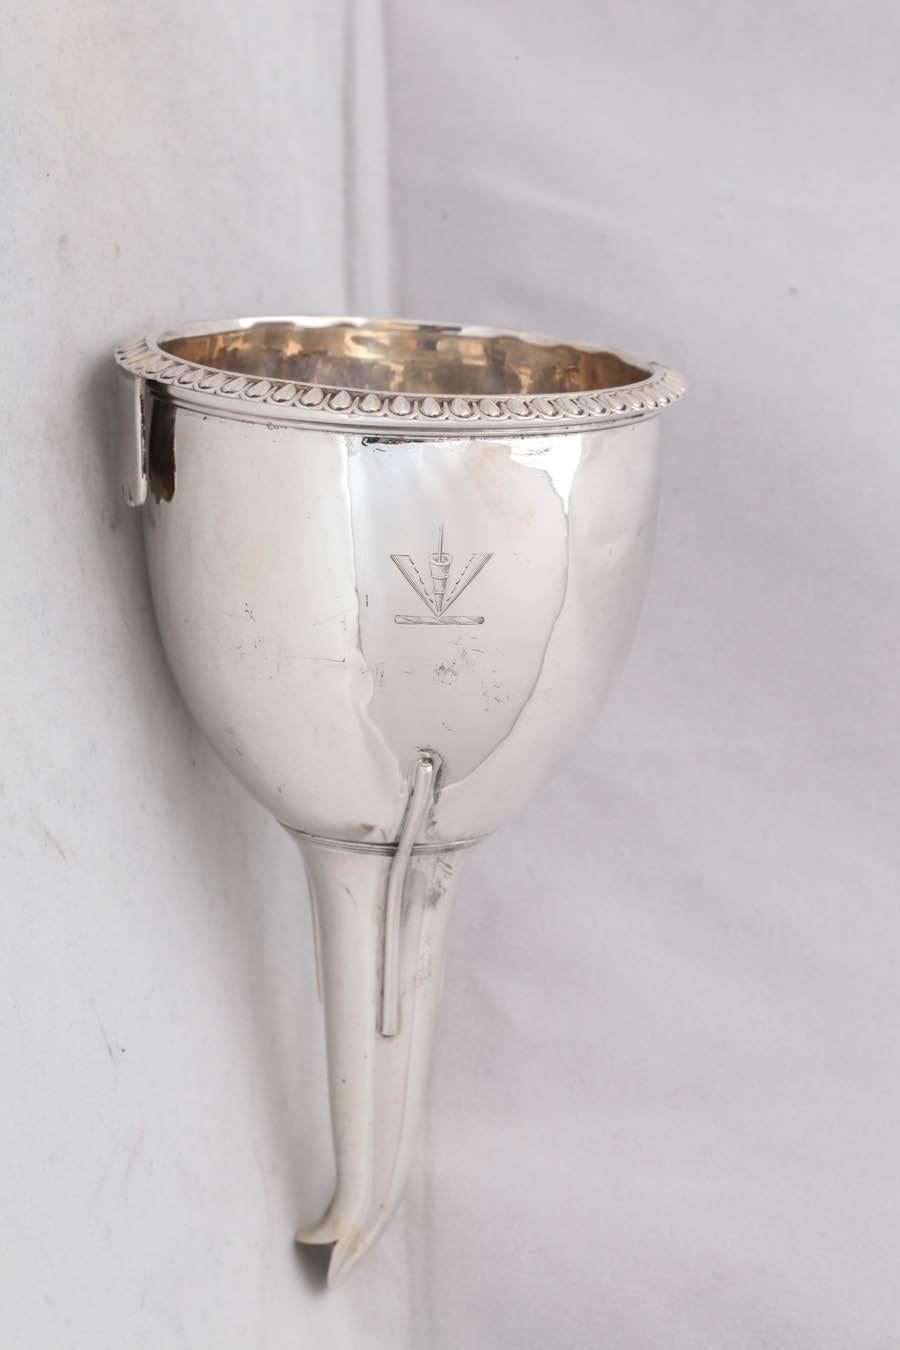 Georgian, sterling silver wine funnel, London, 1813, William Bateman - maker. Has an armorial on one side - a pheon, erect, point downward (representation of the head of a javelin, dart or arrow point, downward, with two long barbs engrailed on the